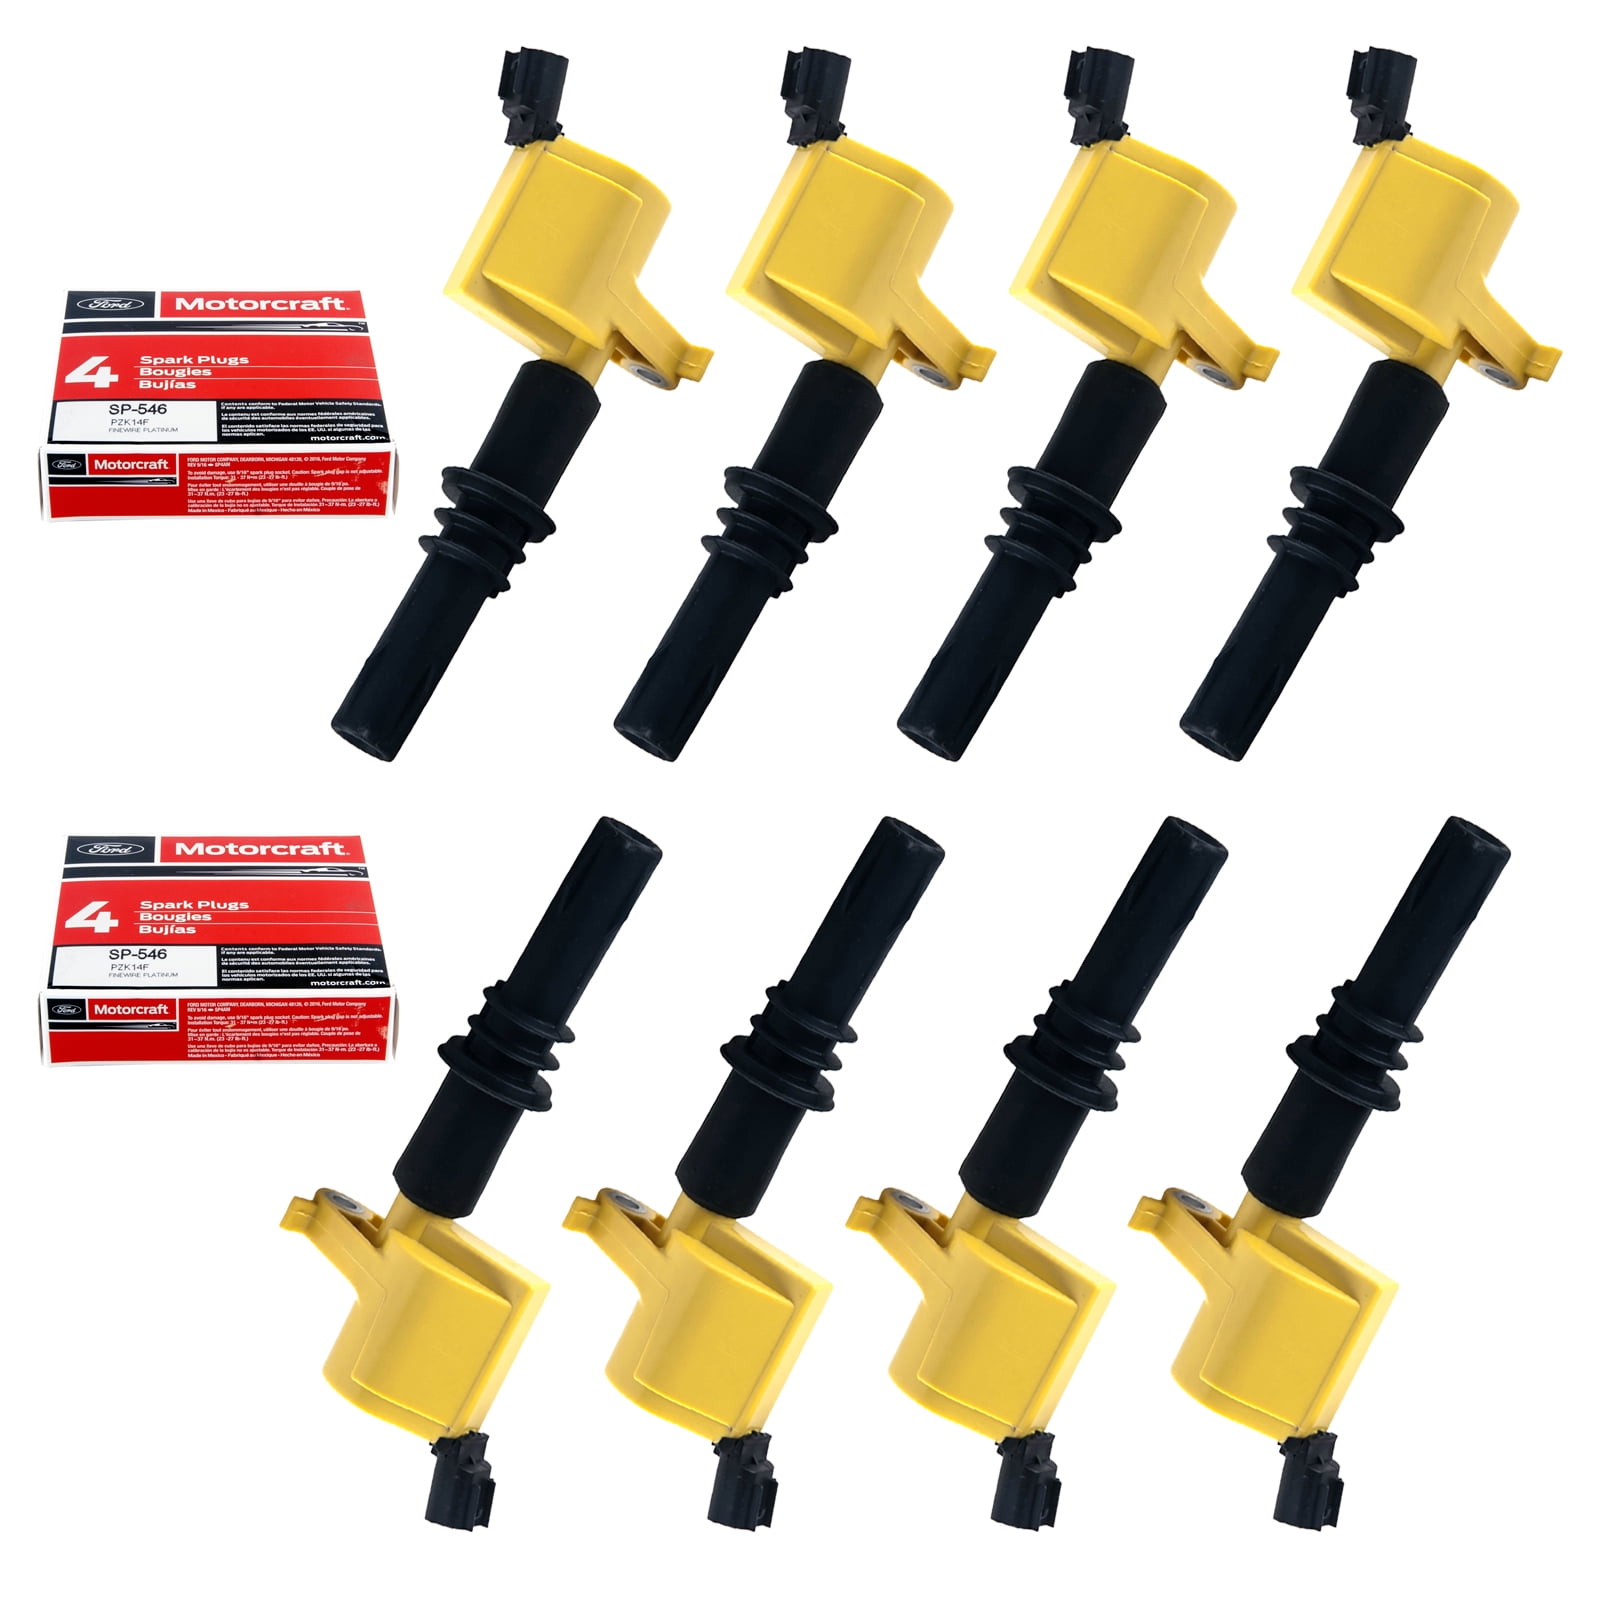 SET OF 8 REPLACEMENT HEAVY DUTY IGNITION COIL DG511B & MOTORCRAFT SP515/SP546